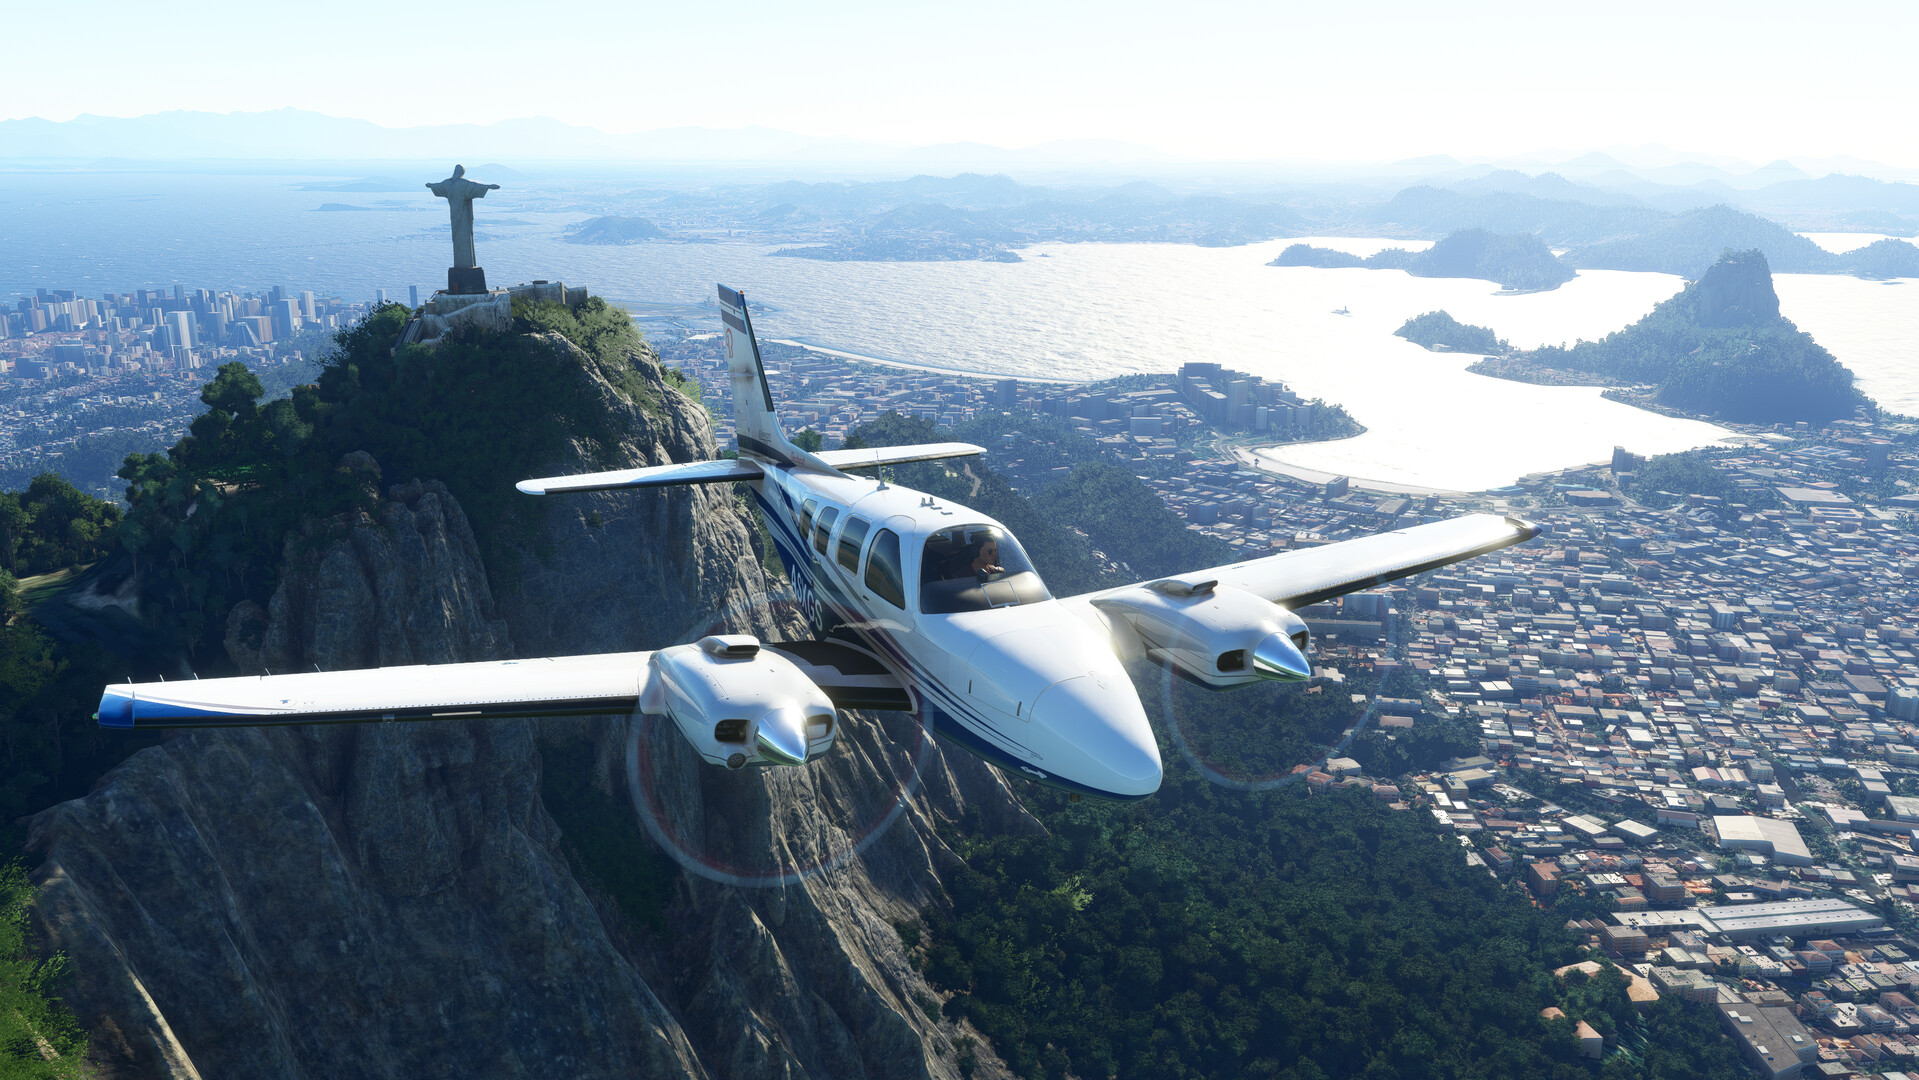 The Best Flight Simulators of 2022 - The Upcoming and Current